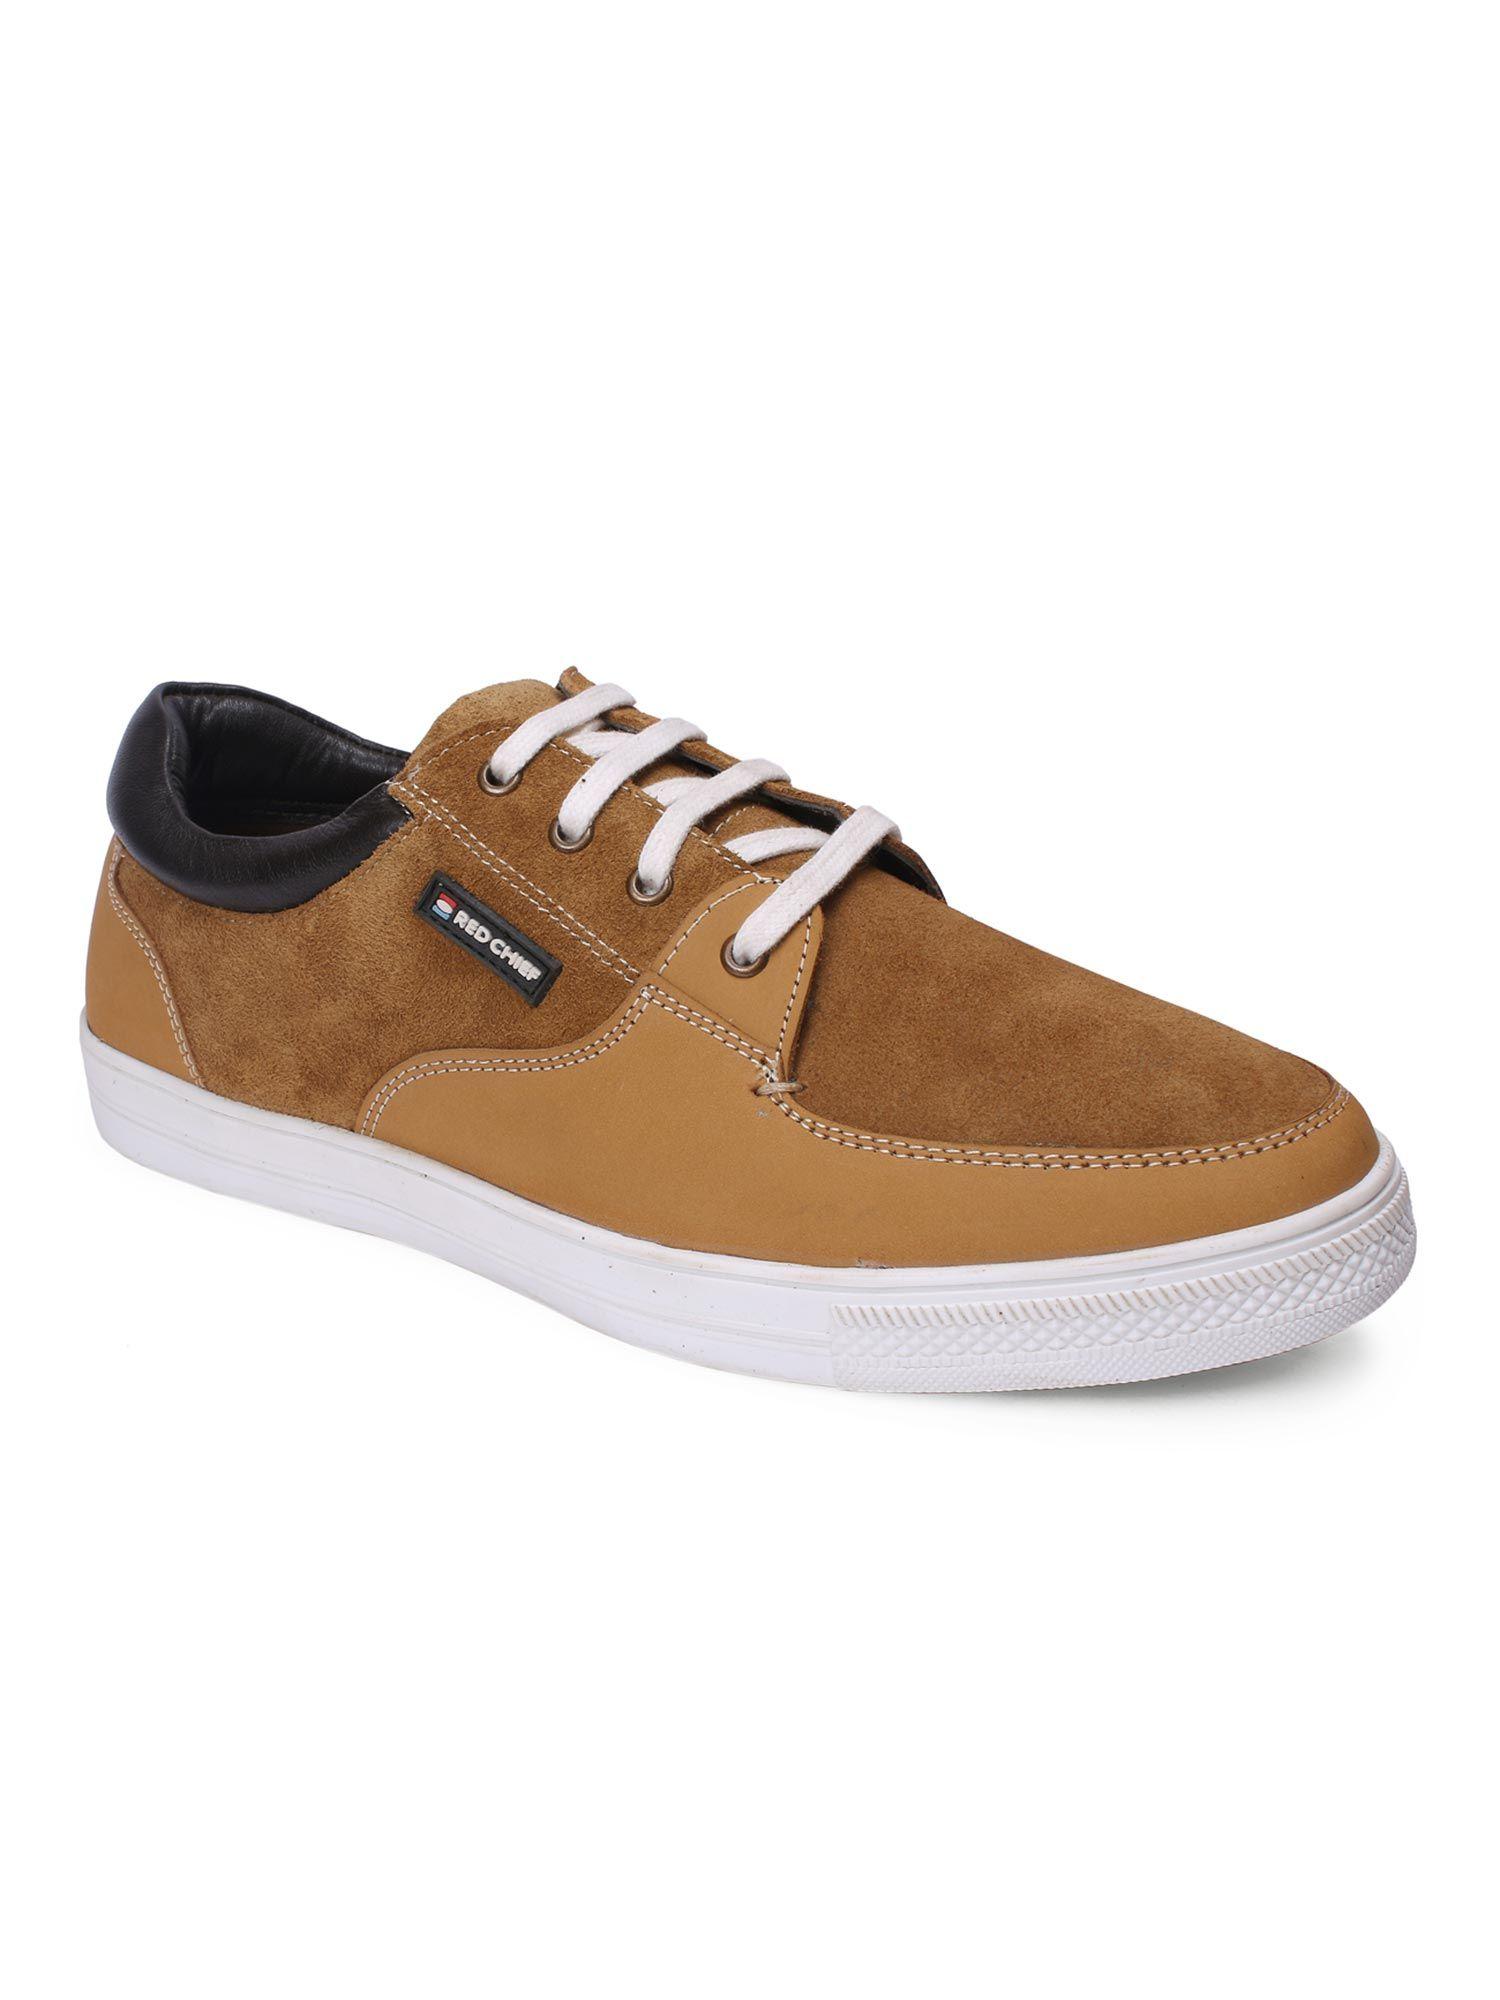 rust leather sneaker shoes